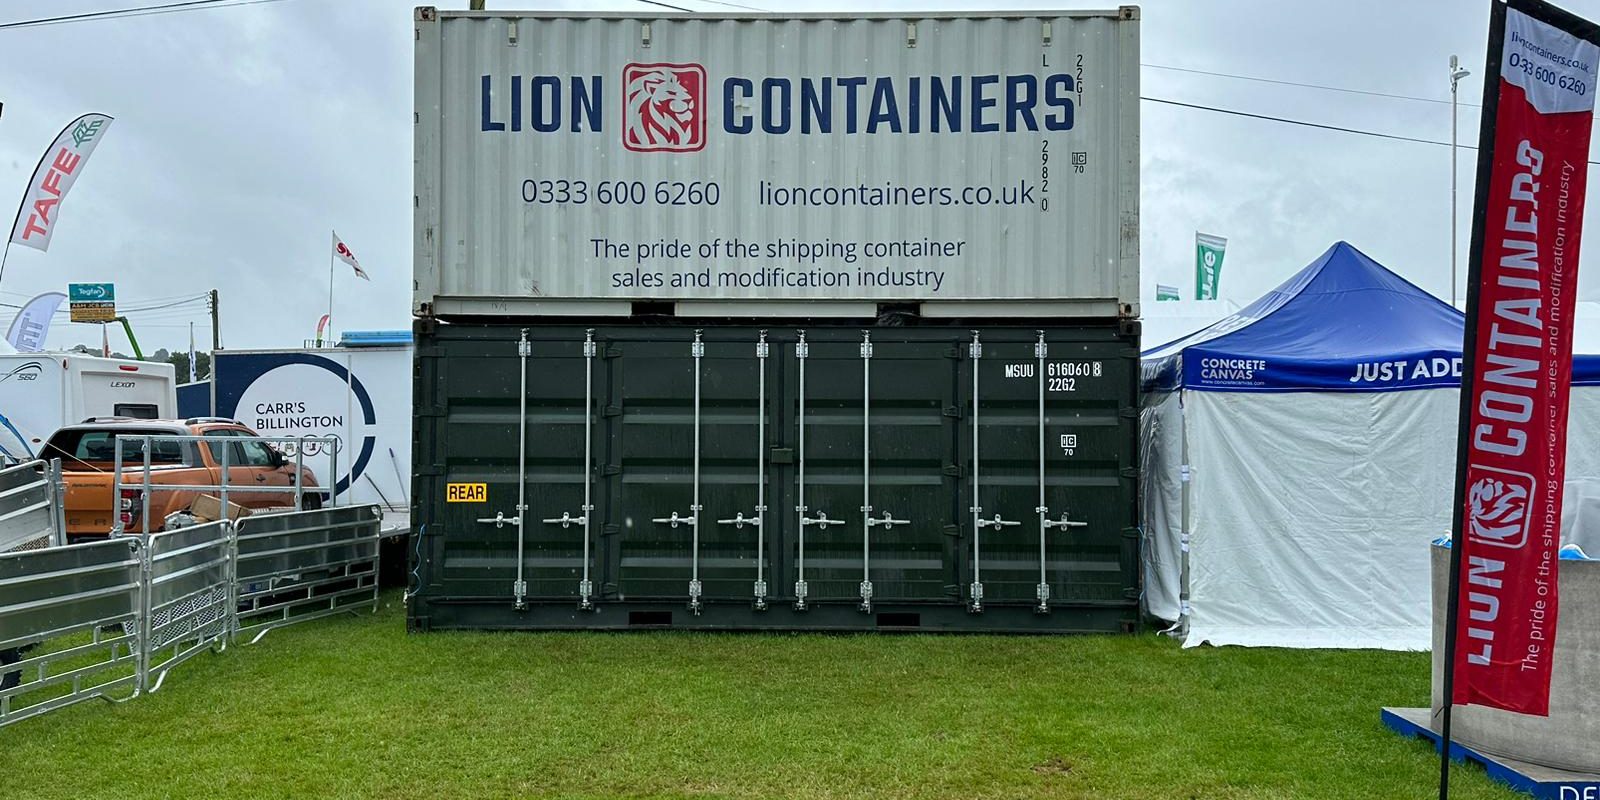 Lion Containers set up at the Royal Welsh Show.